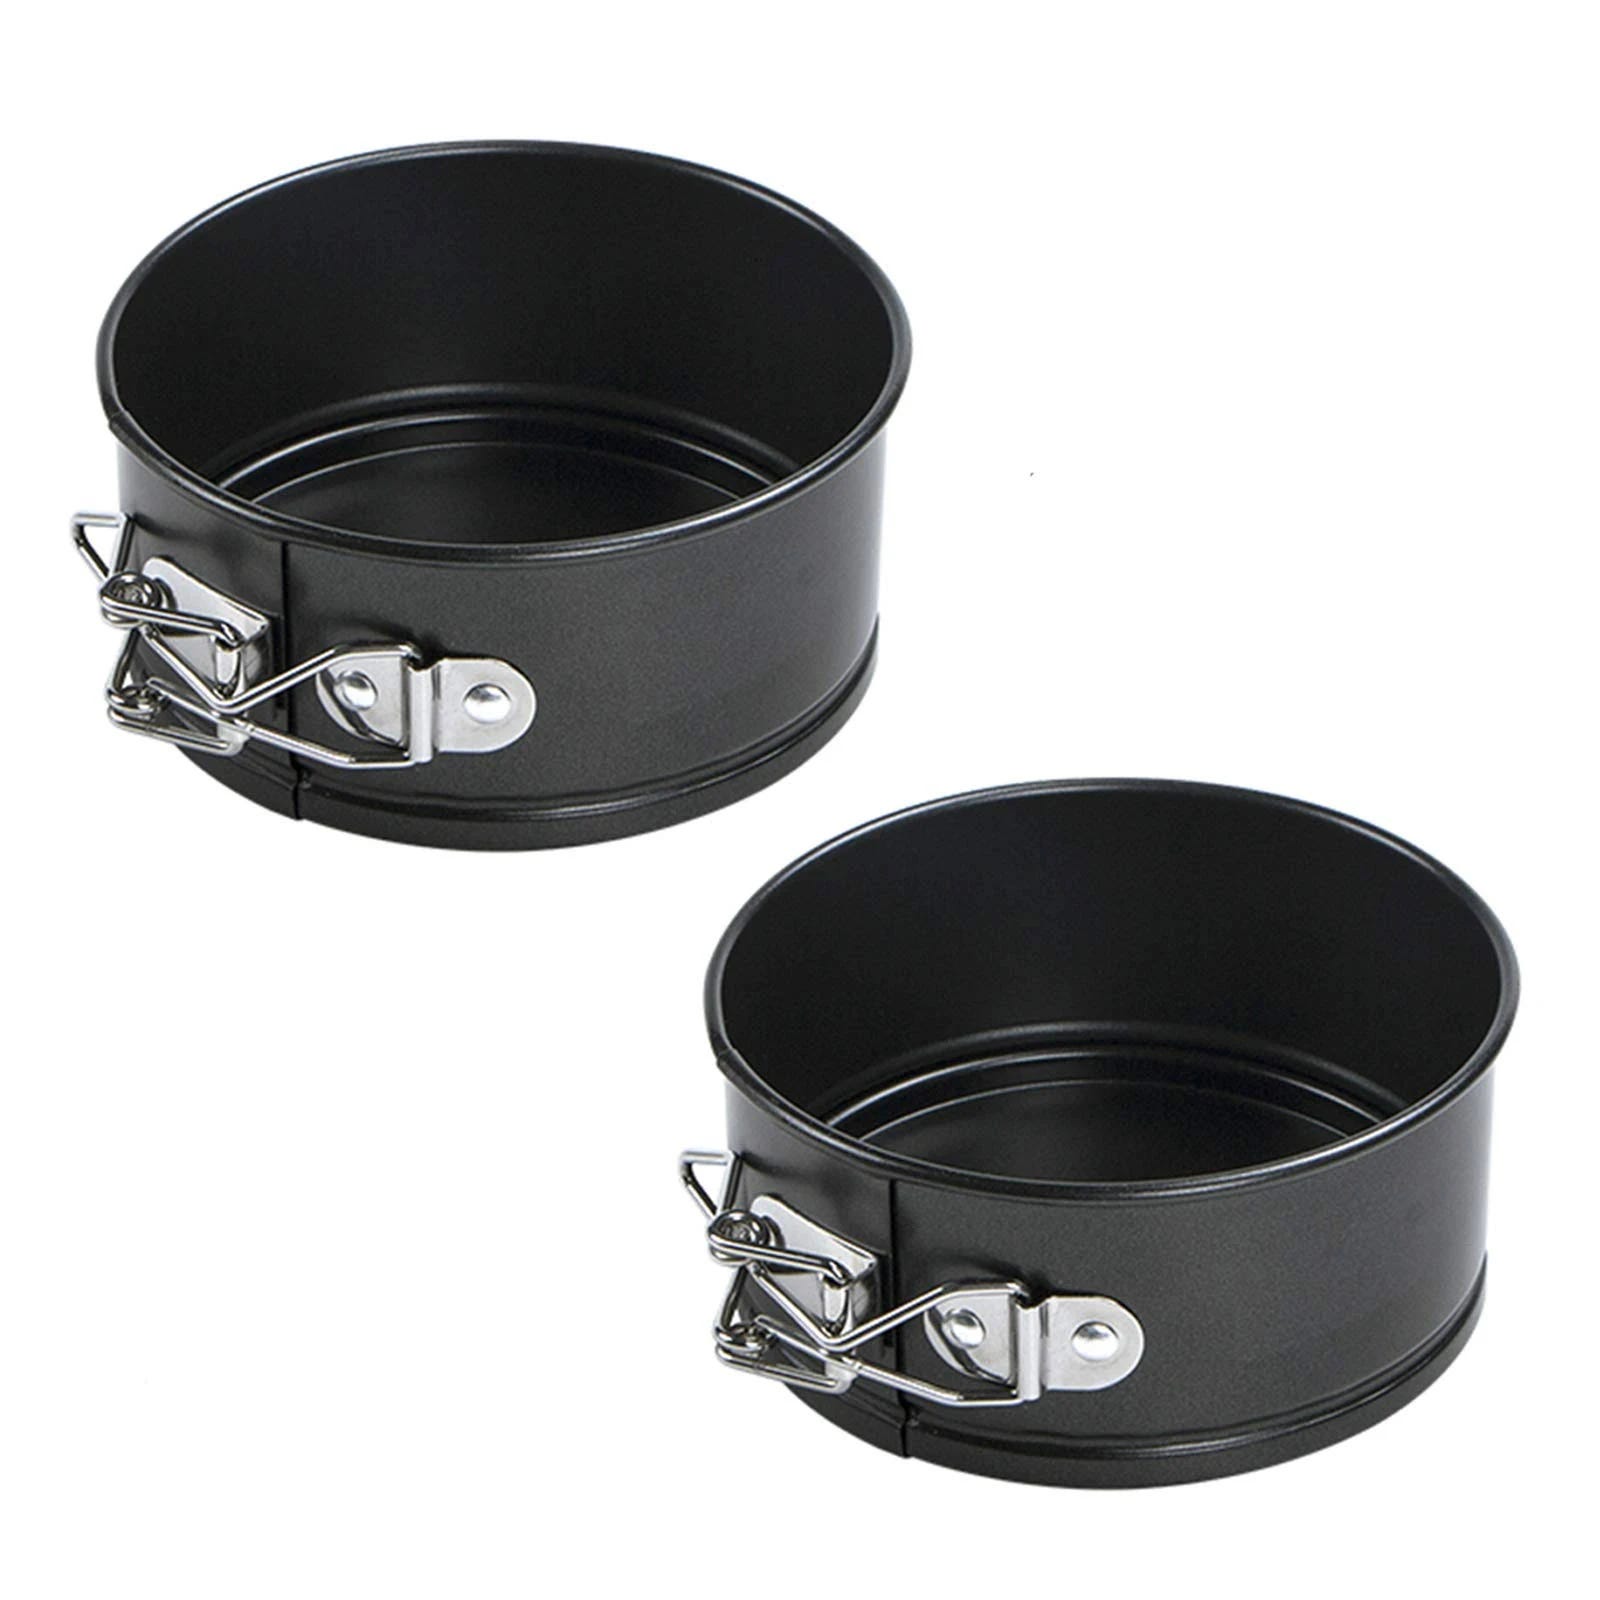 Heavy Gauge Carbon Coated Mini Springform Pans for Perfect IP Accessories | Image